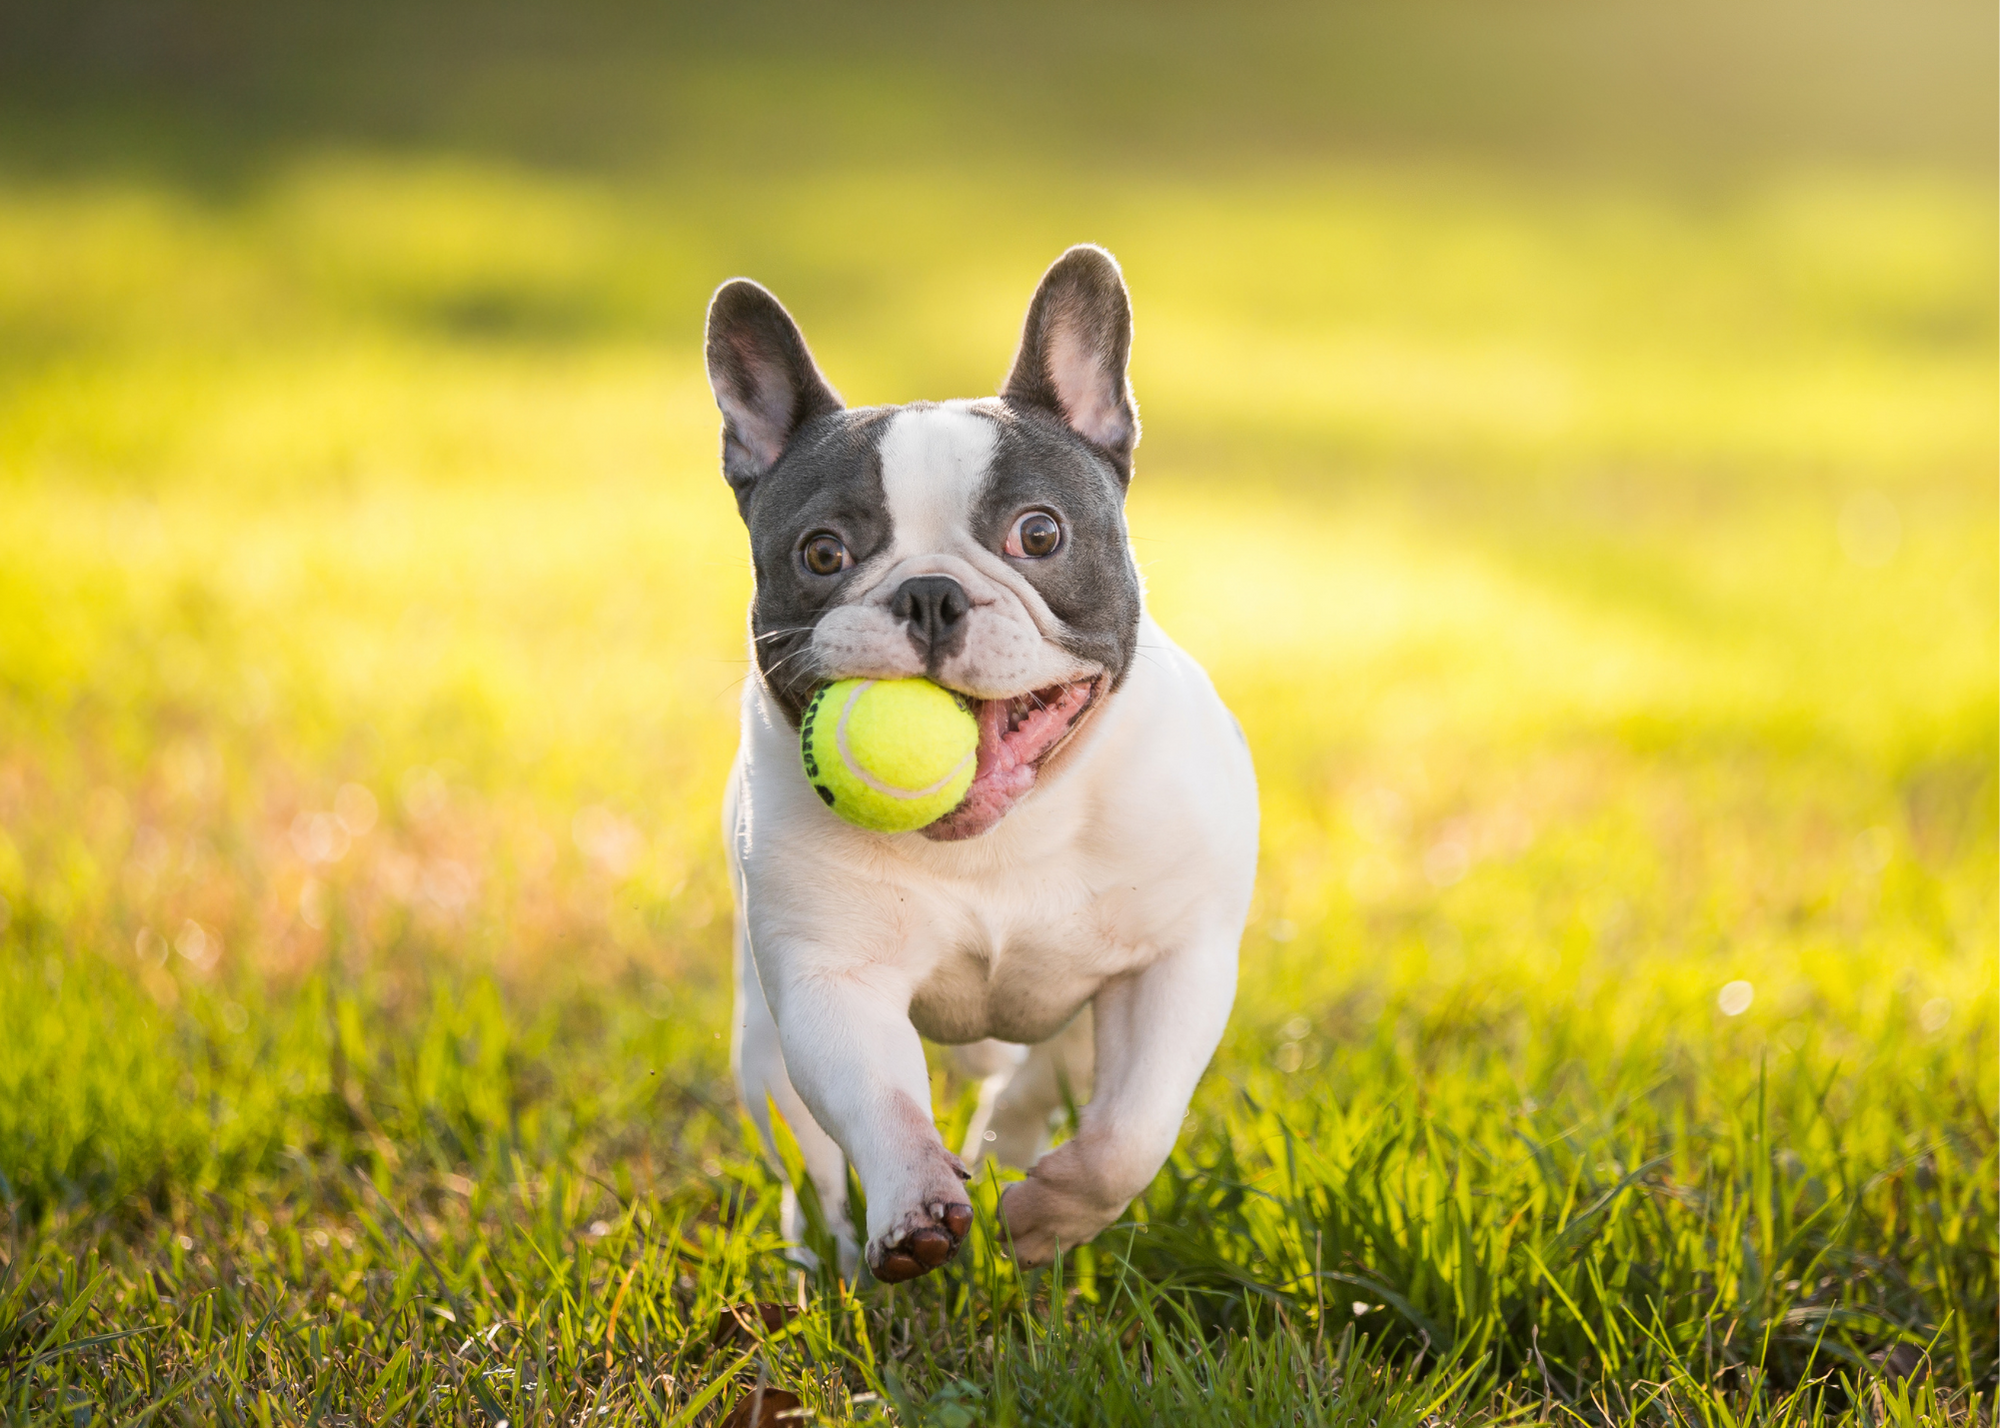 A white French bulldog holding tennis ball in is mouth